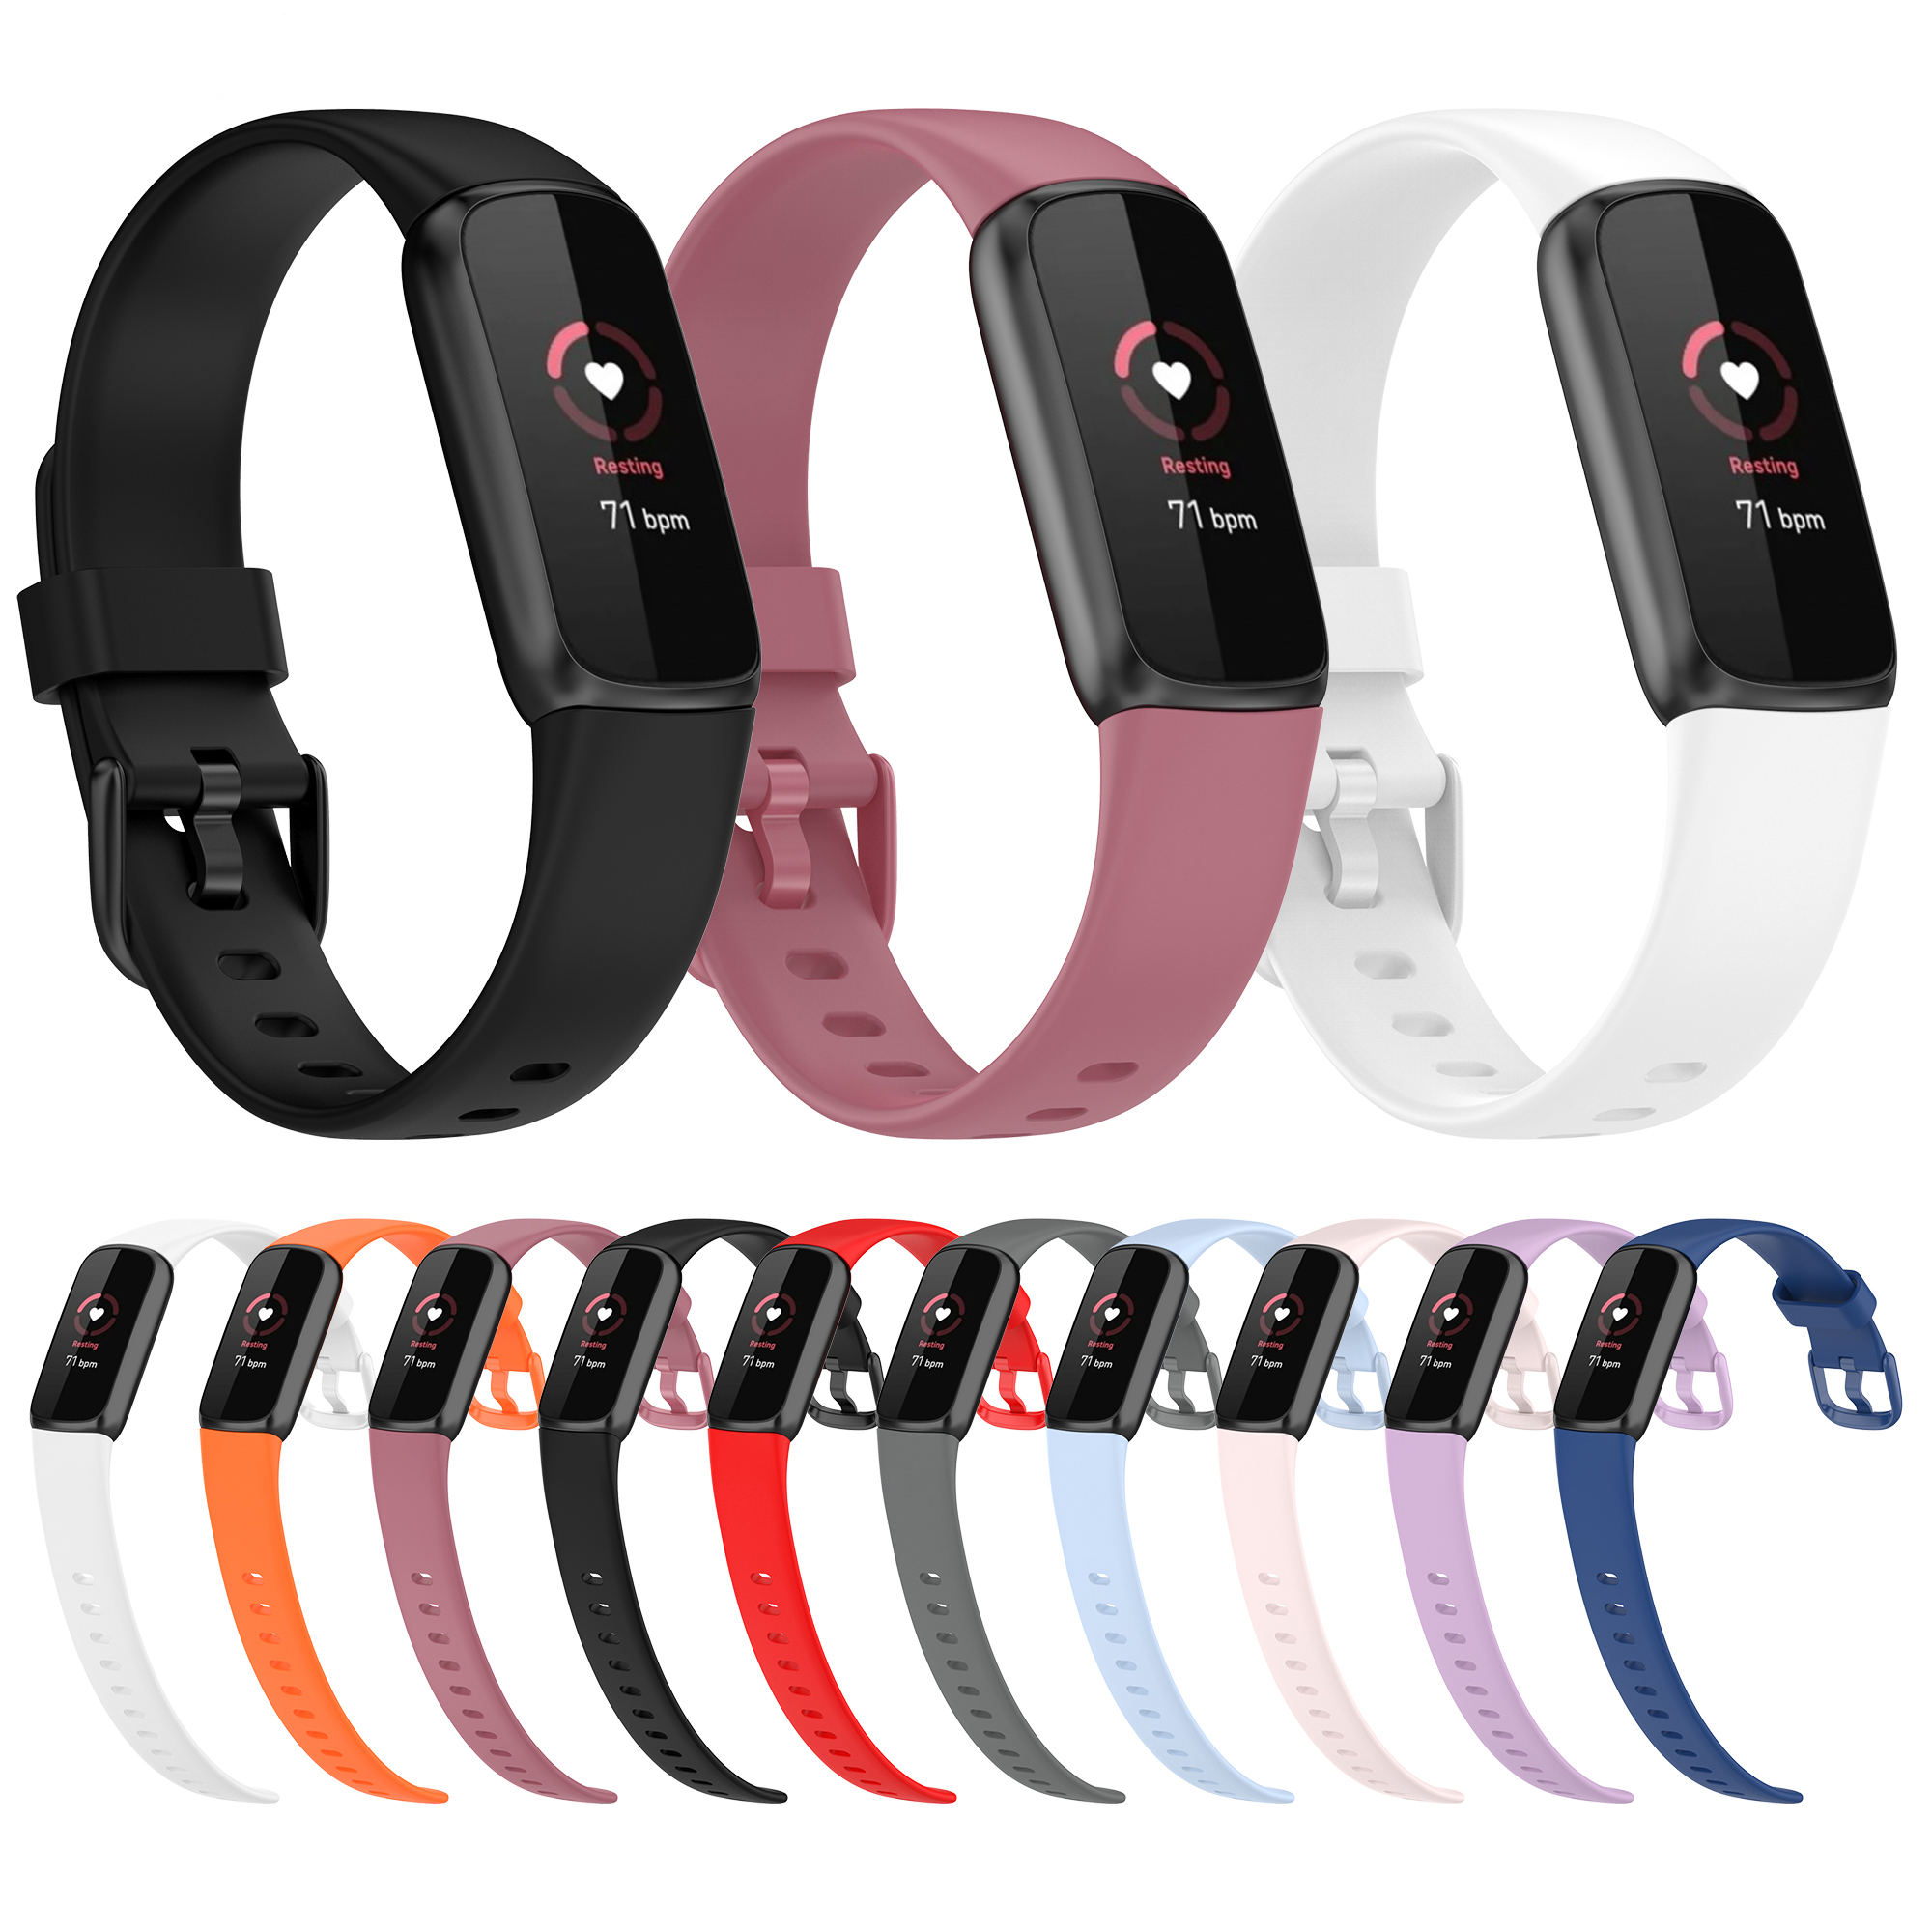 Bakeey-Comfortable-Sweatproof-Soft-Silicone-Watch-Band-Strap-Replacement-for-Fitbit-Luxe-1868080-1